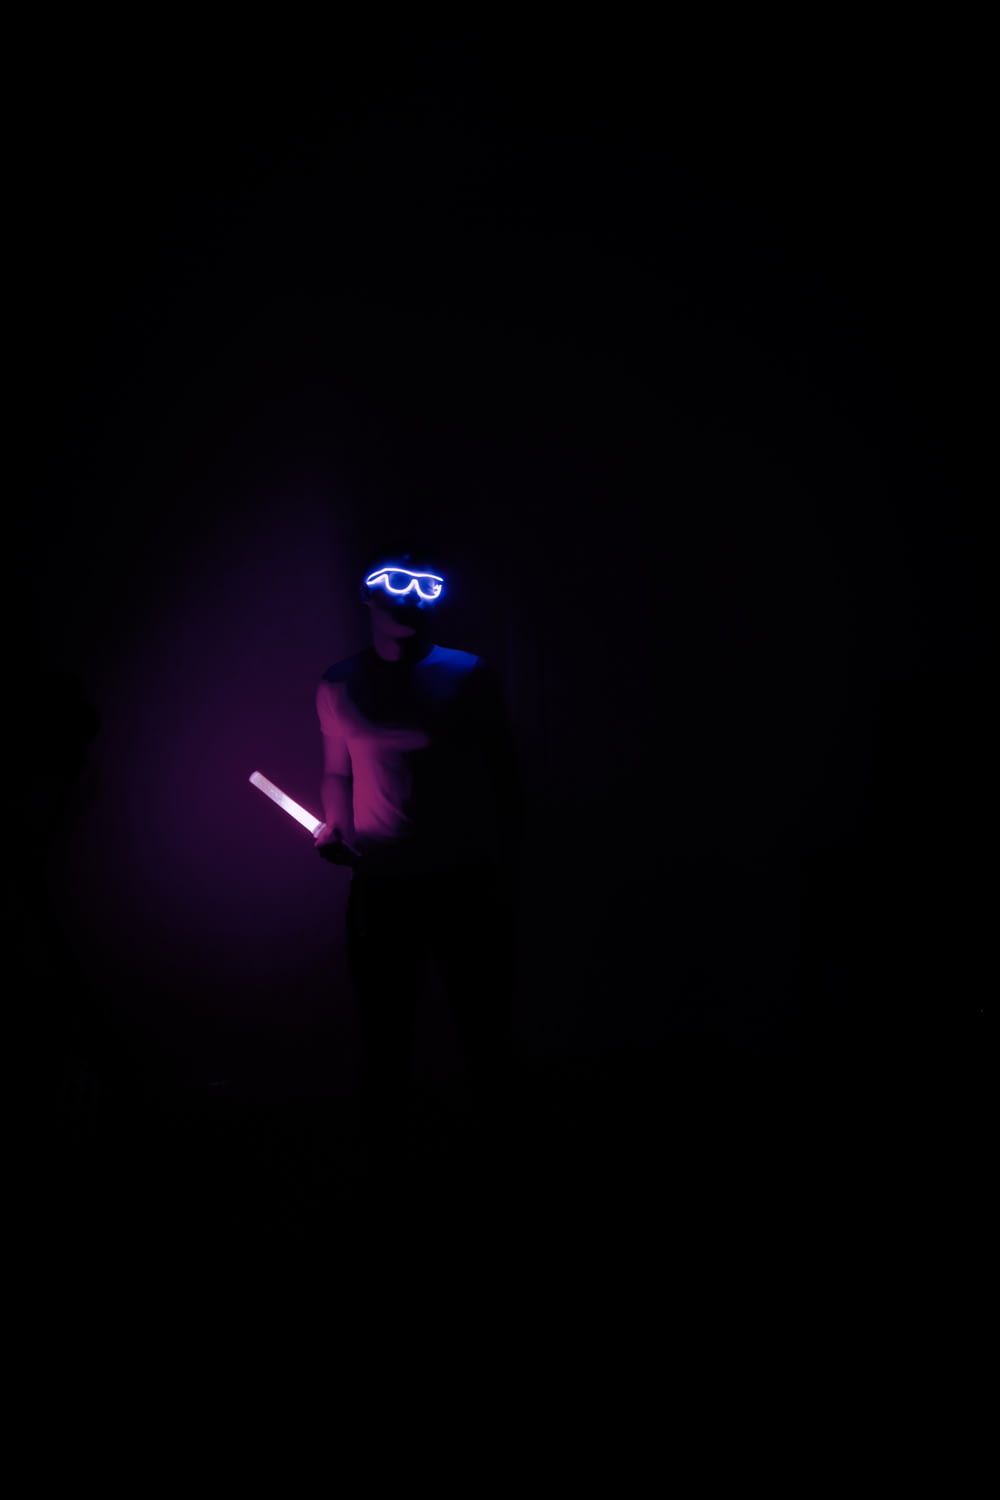 a person in a dark room holding a light saber